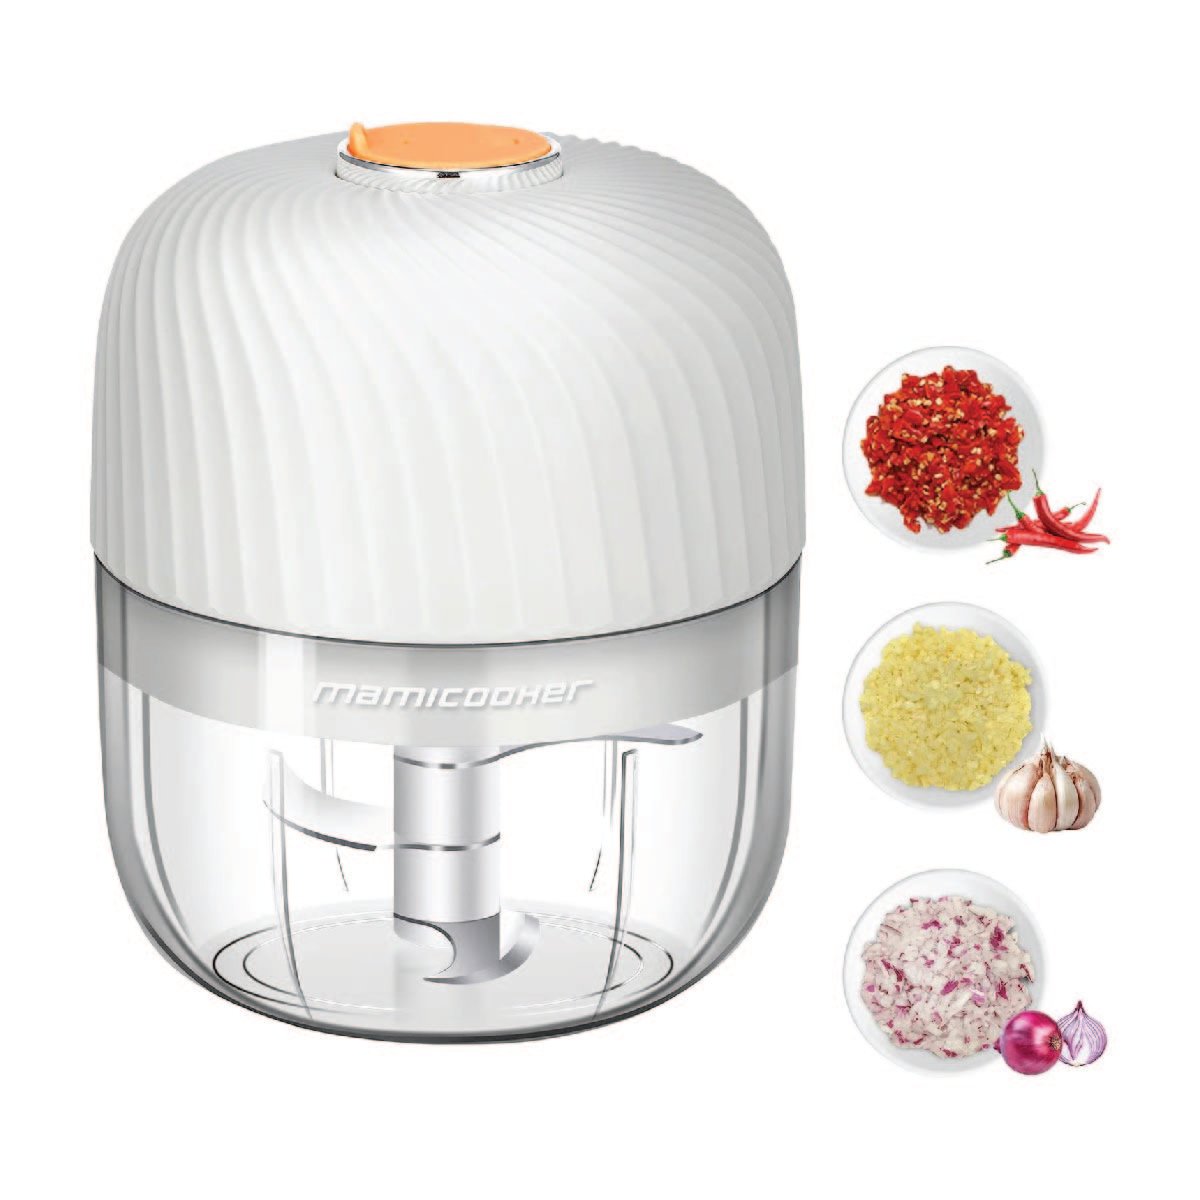 An electric food chopper with bowls of chopped peppers, garlic and onion on the side.